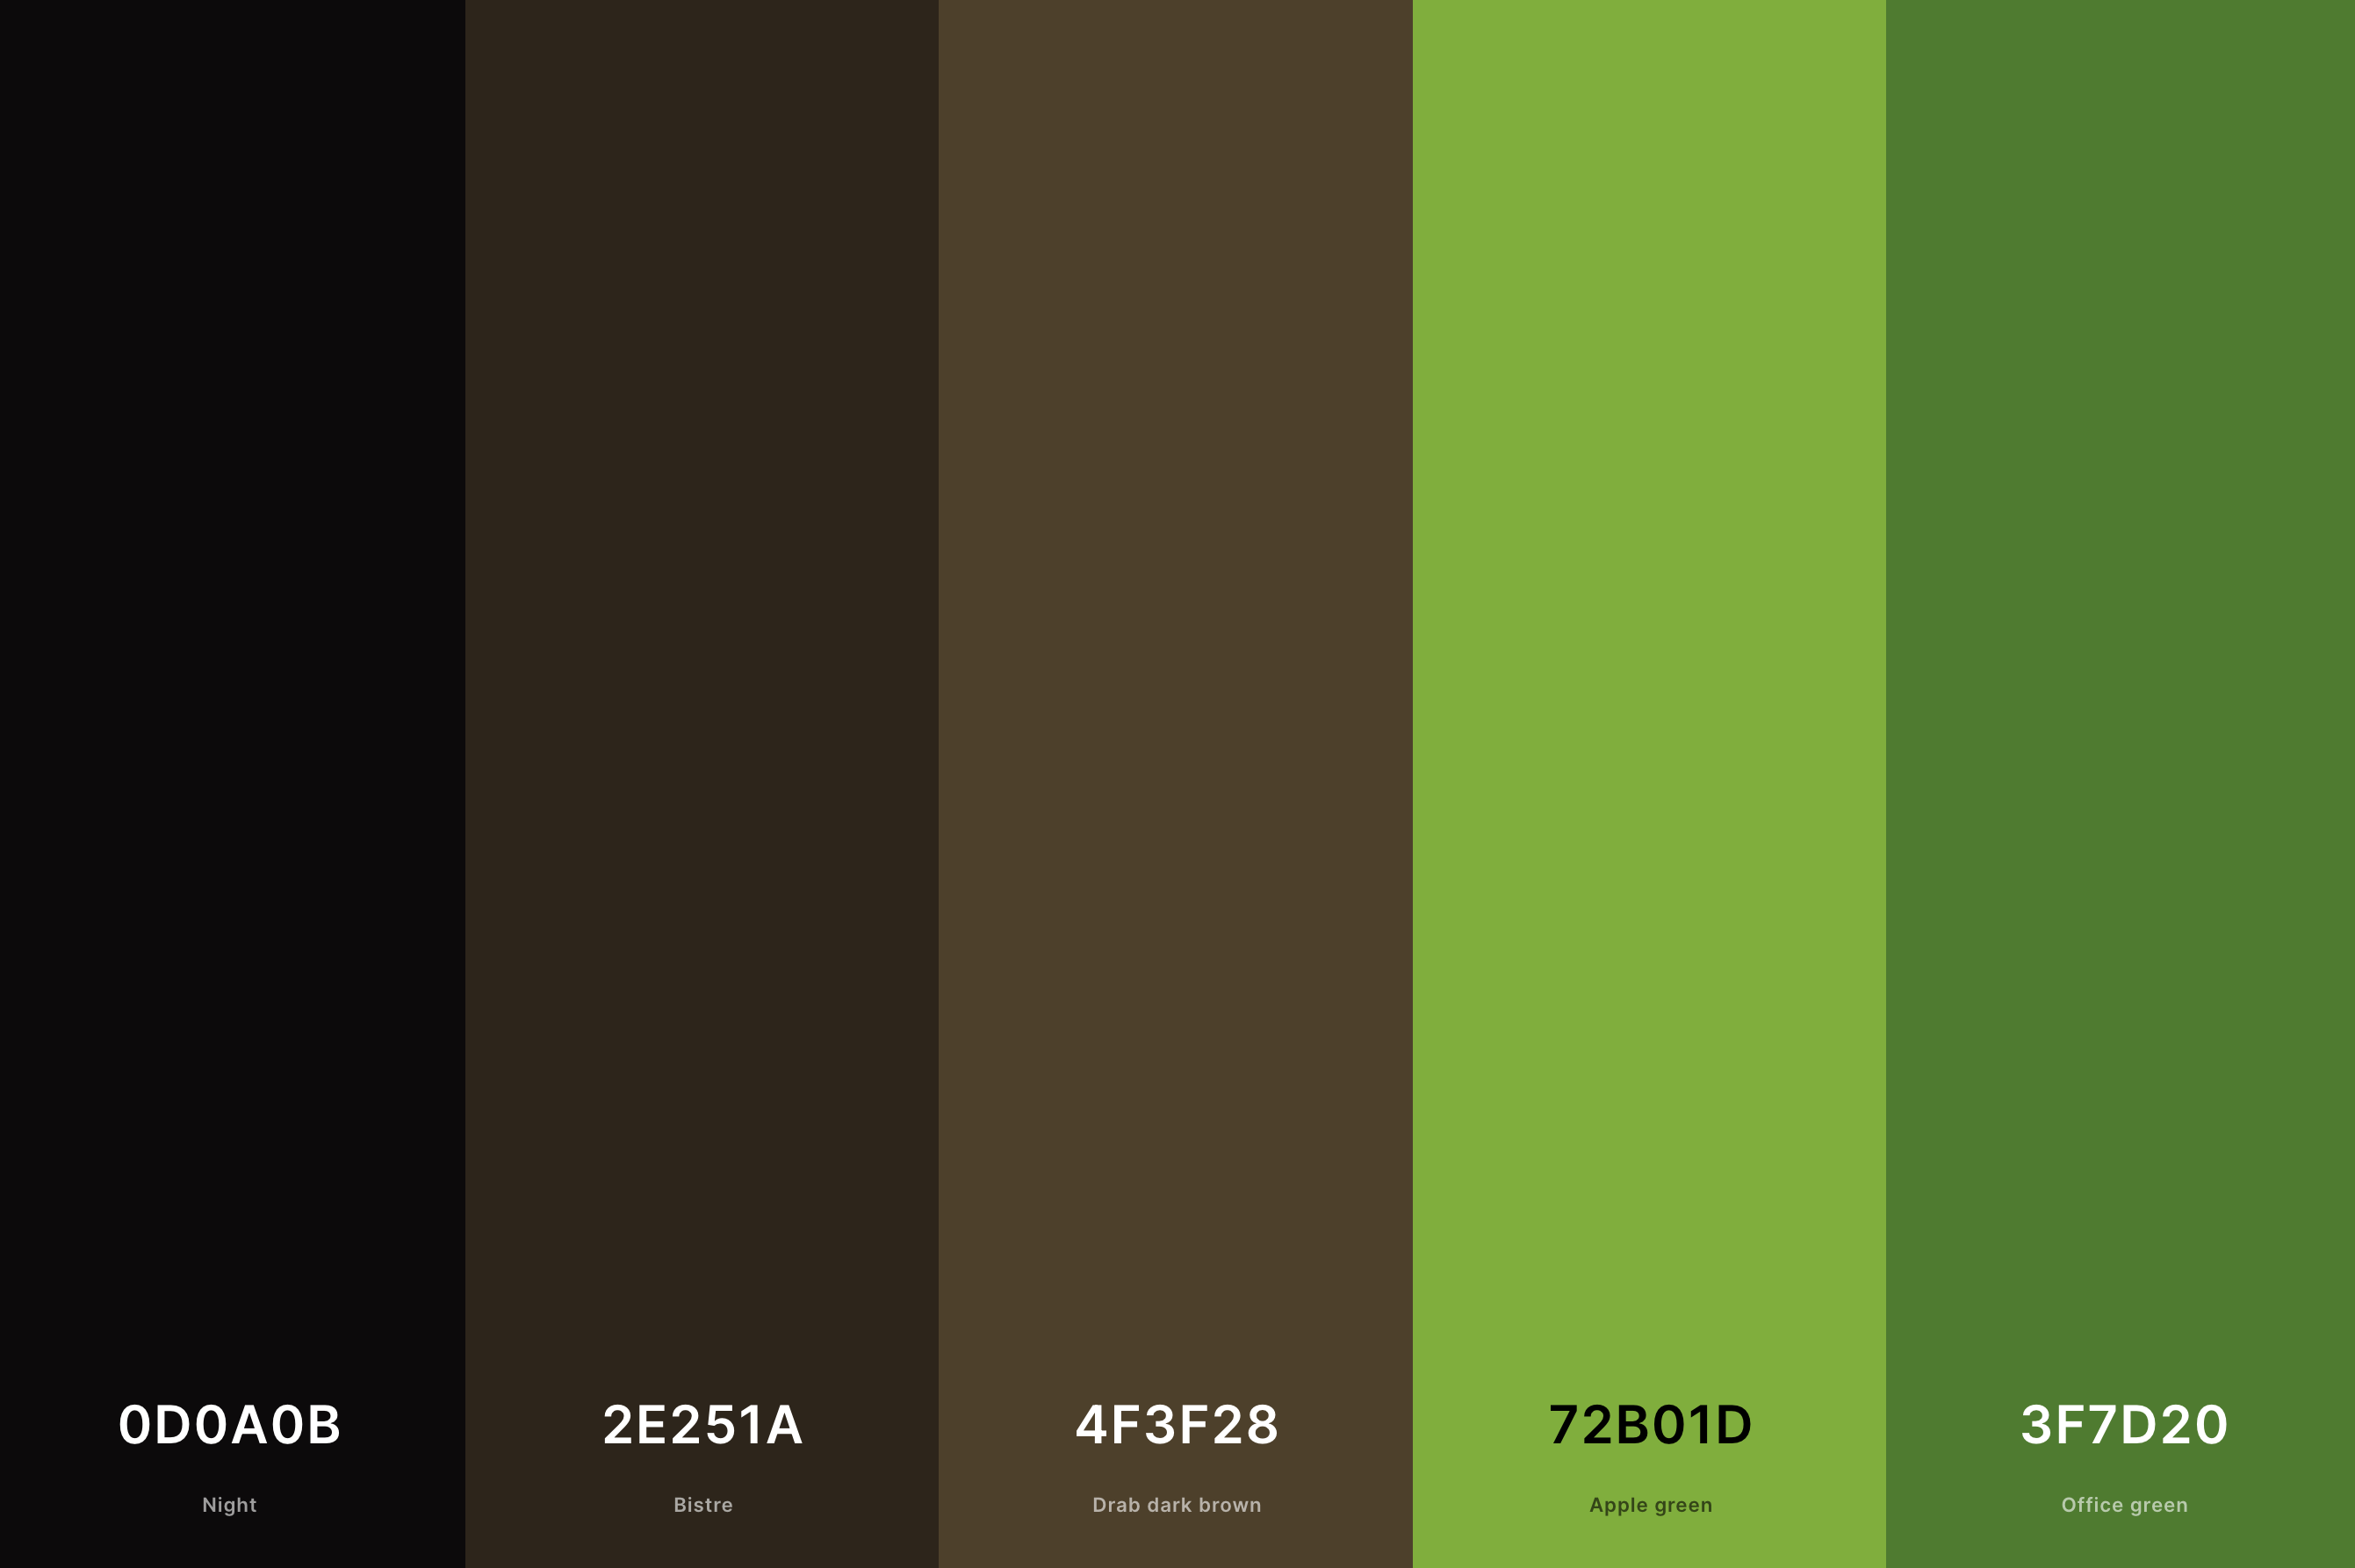 26. Black, Brown And Green Color Palette Color Palette with Night (Hex #0D0A0B) + Bistre (Hex #2E251A) + Drab Dark Brown (Hex #4F3F28) + Apple Green (Hex #72B01D) + Office Green (Hex #3F7D20) Color Palette with Hex Codes